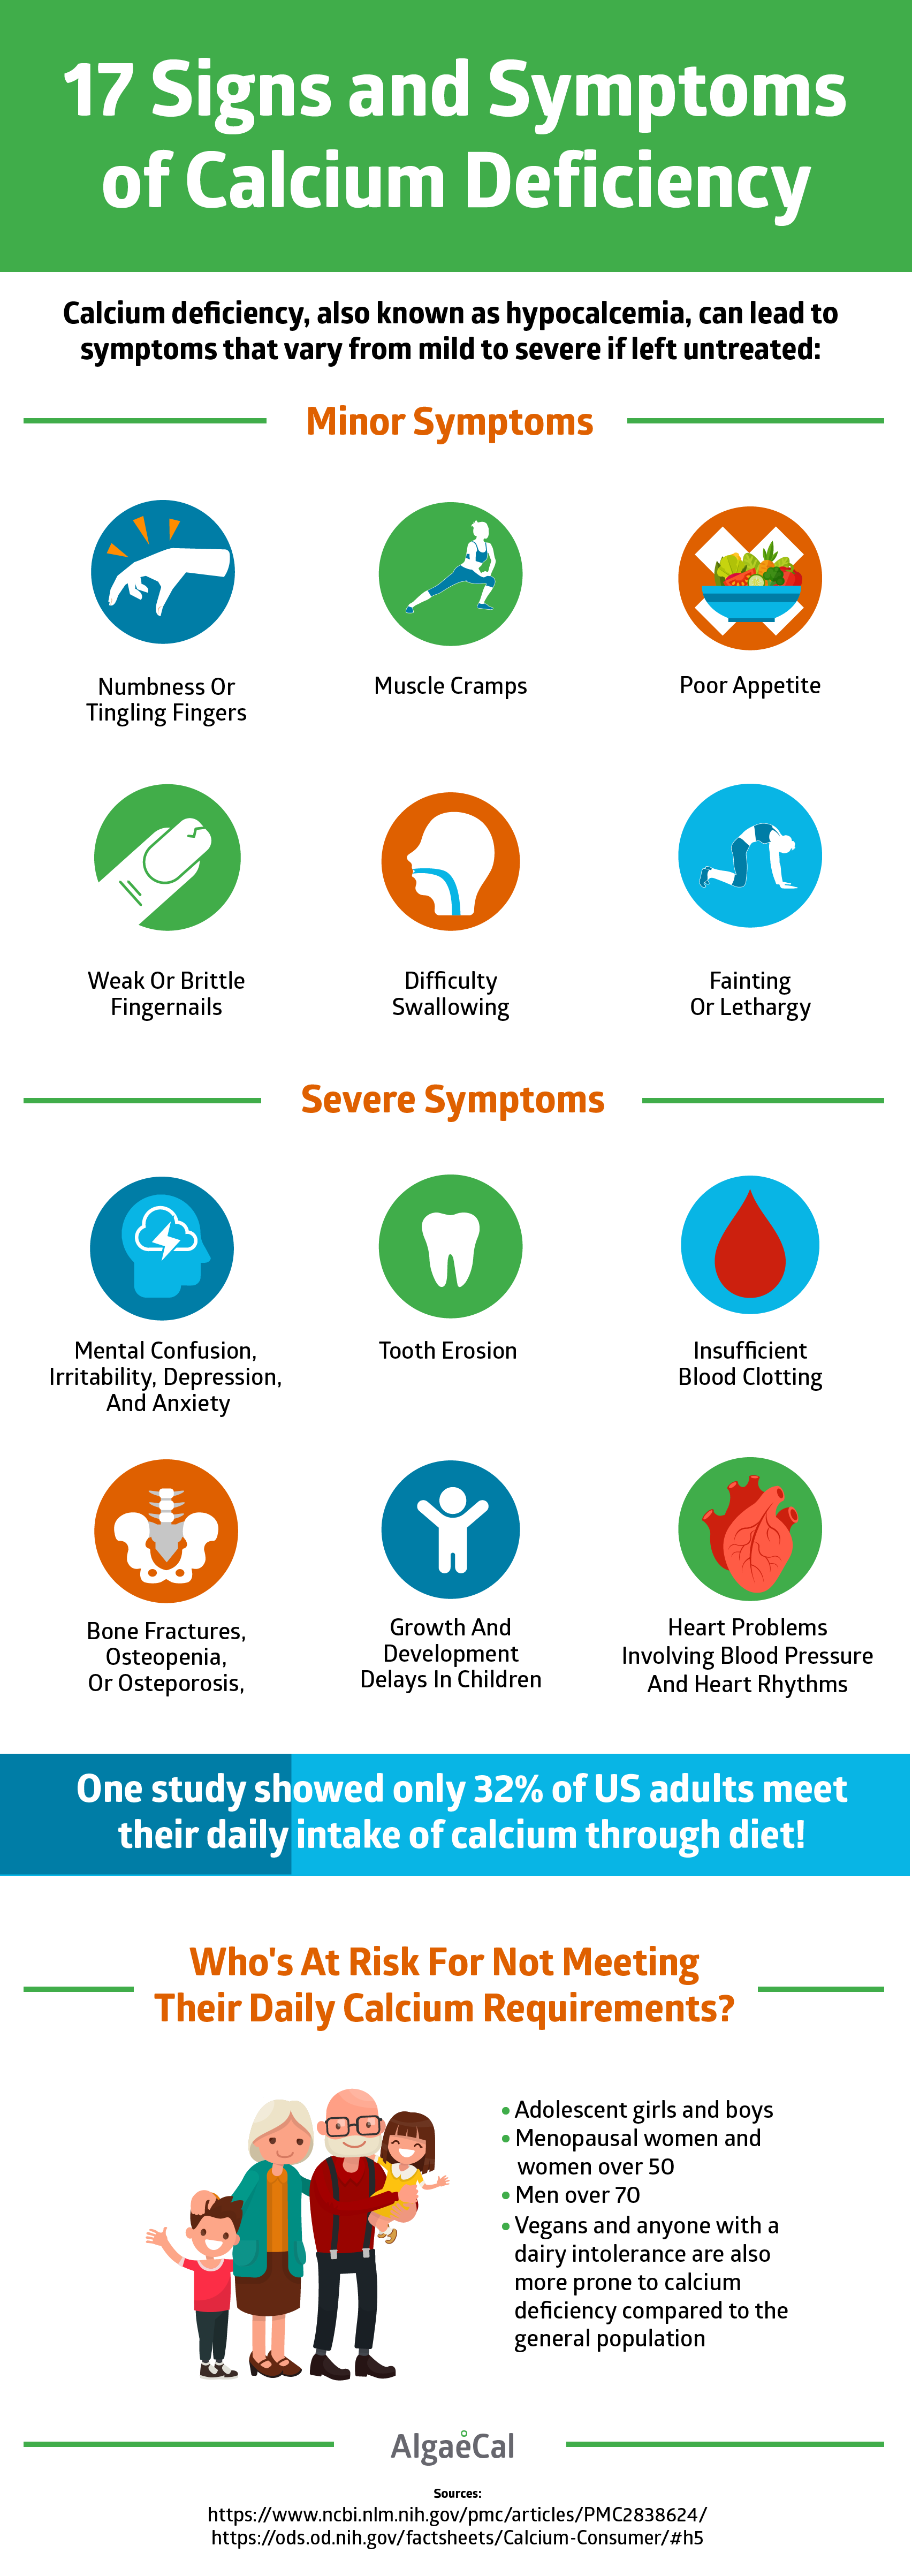 calcium deficiency signs and symptoms infographic